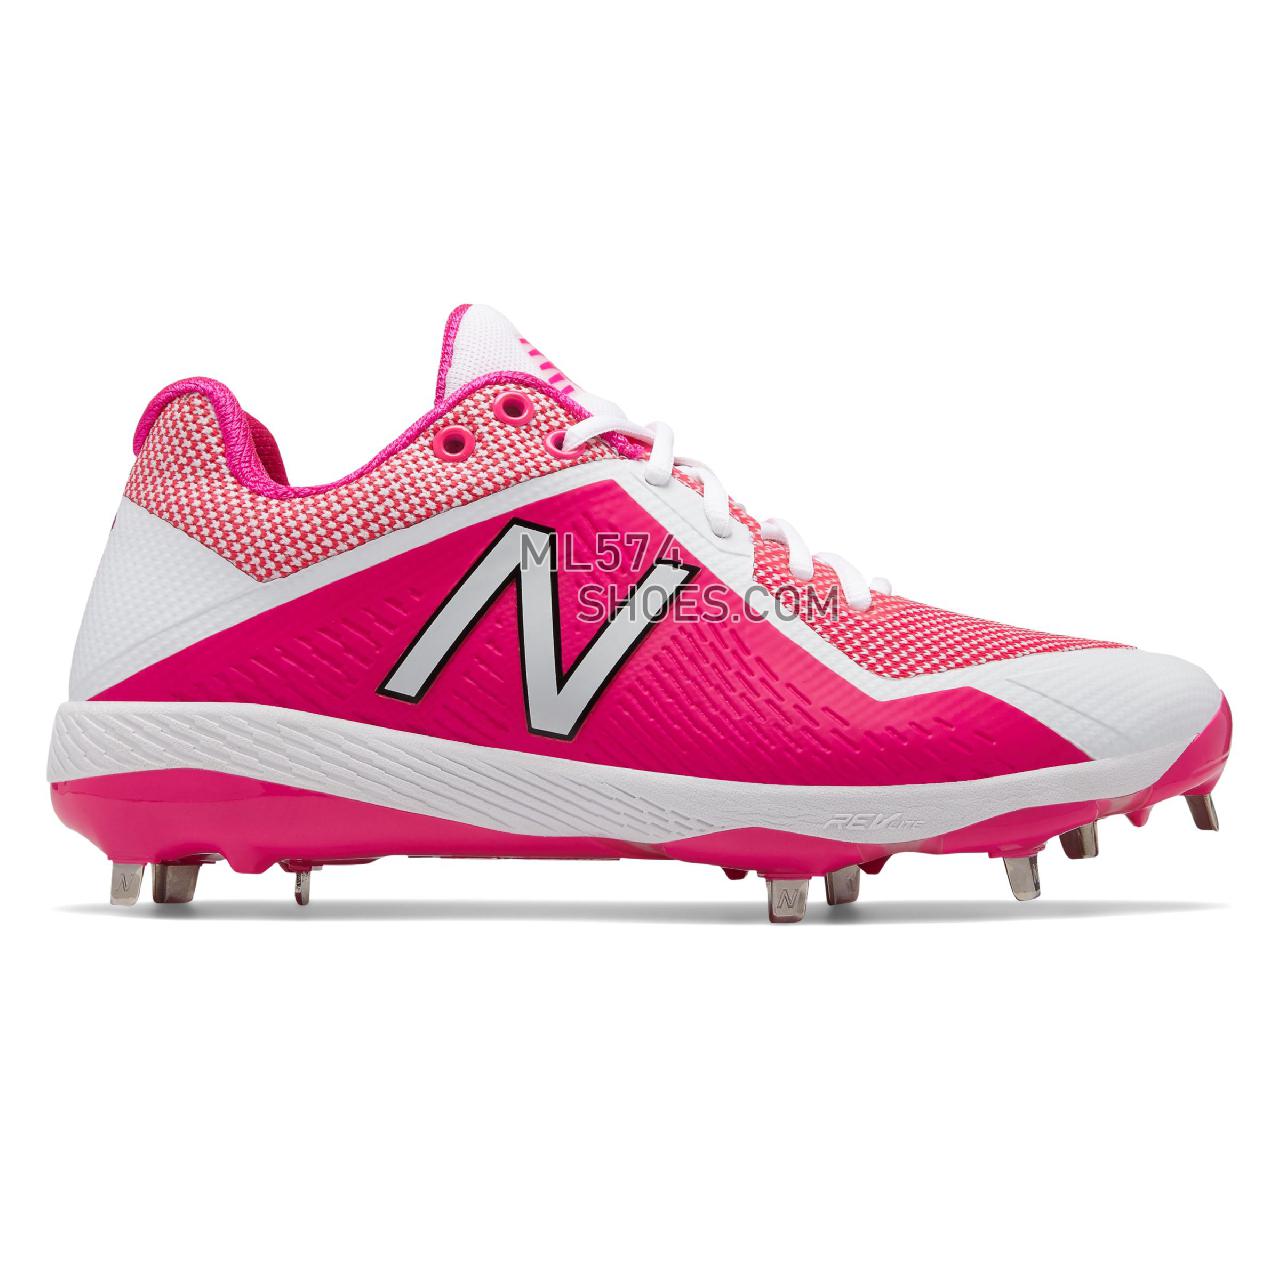 New Balance 4040v4 Mothers Day - Men's 4040 - Baseball Alpha Pink with White - L4040AP4